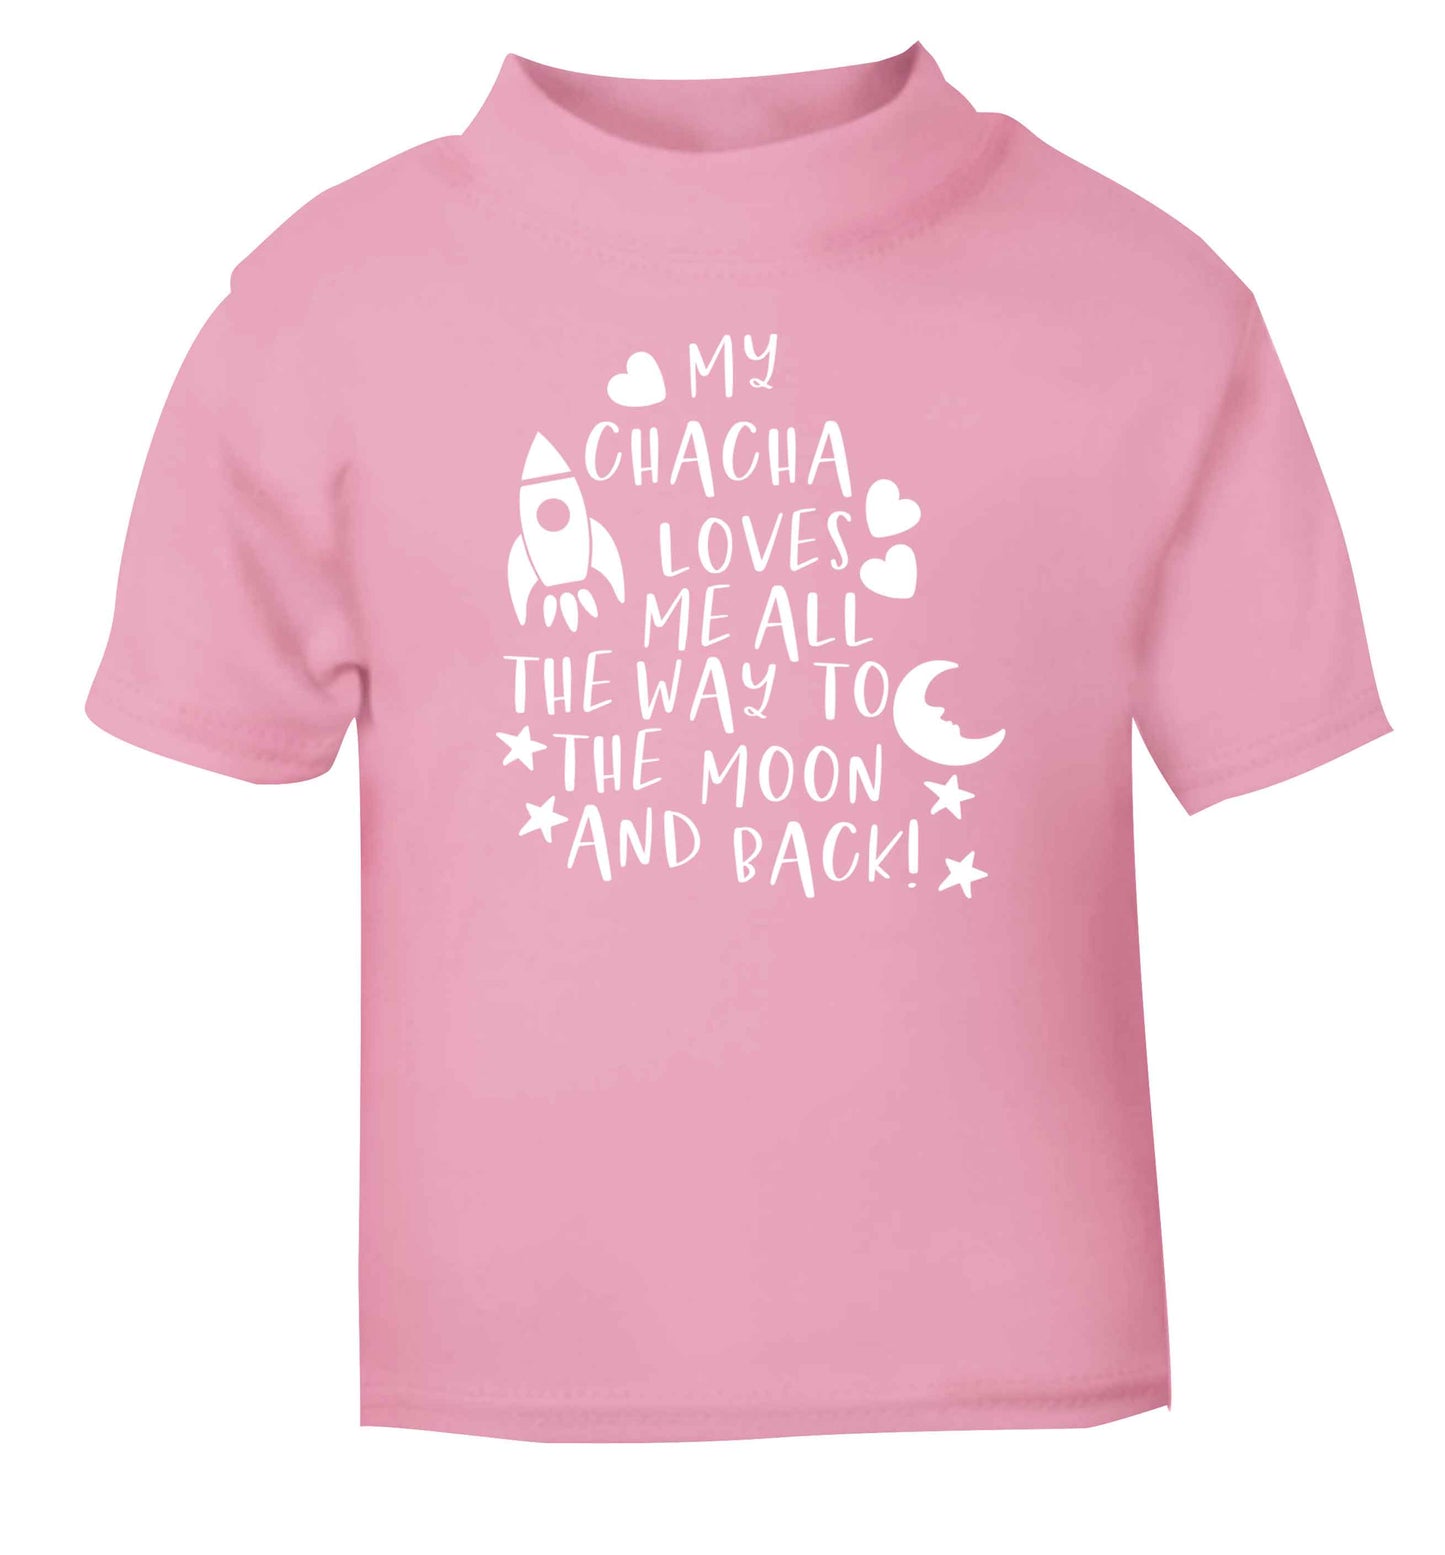 My chacha loves me all the way to the moon and back light pink Baby Toddler Tshirt 2 Years